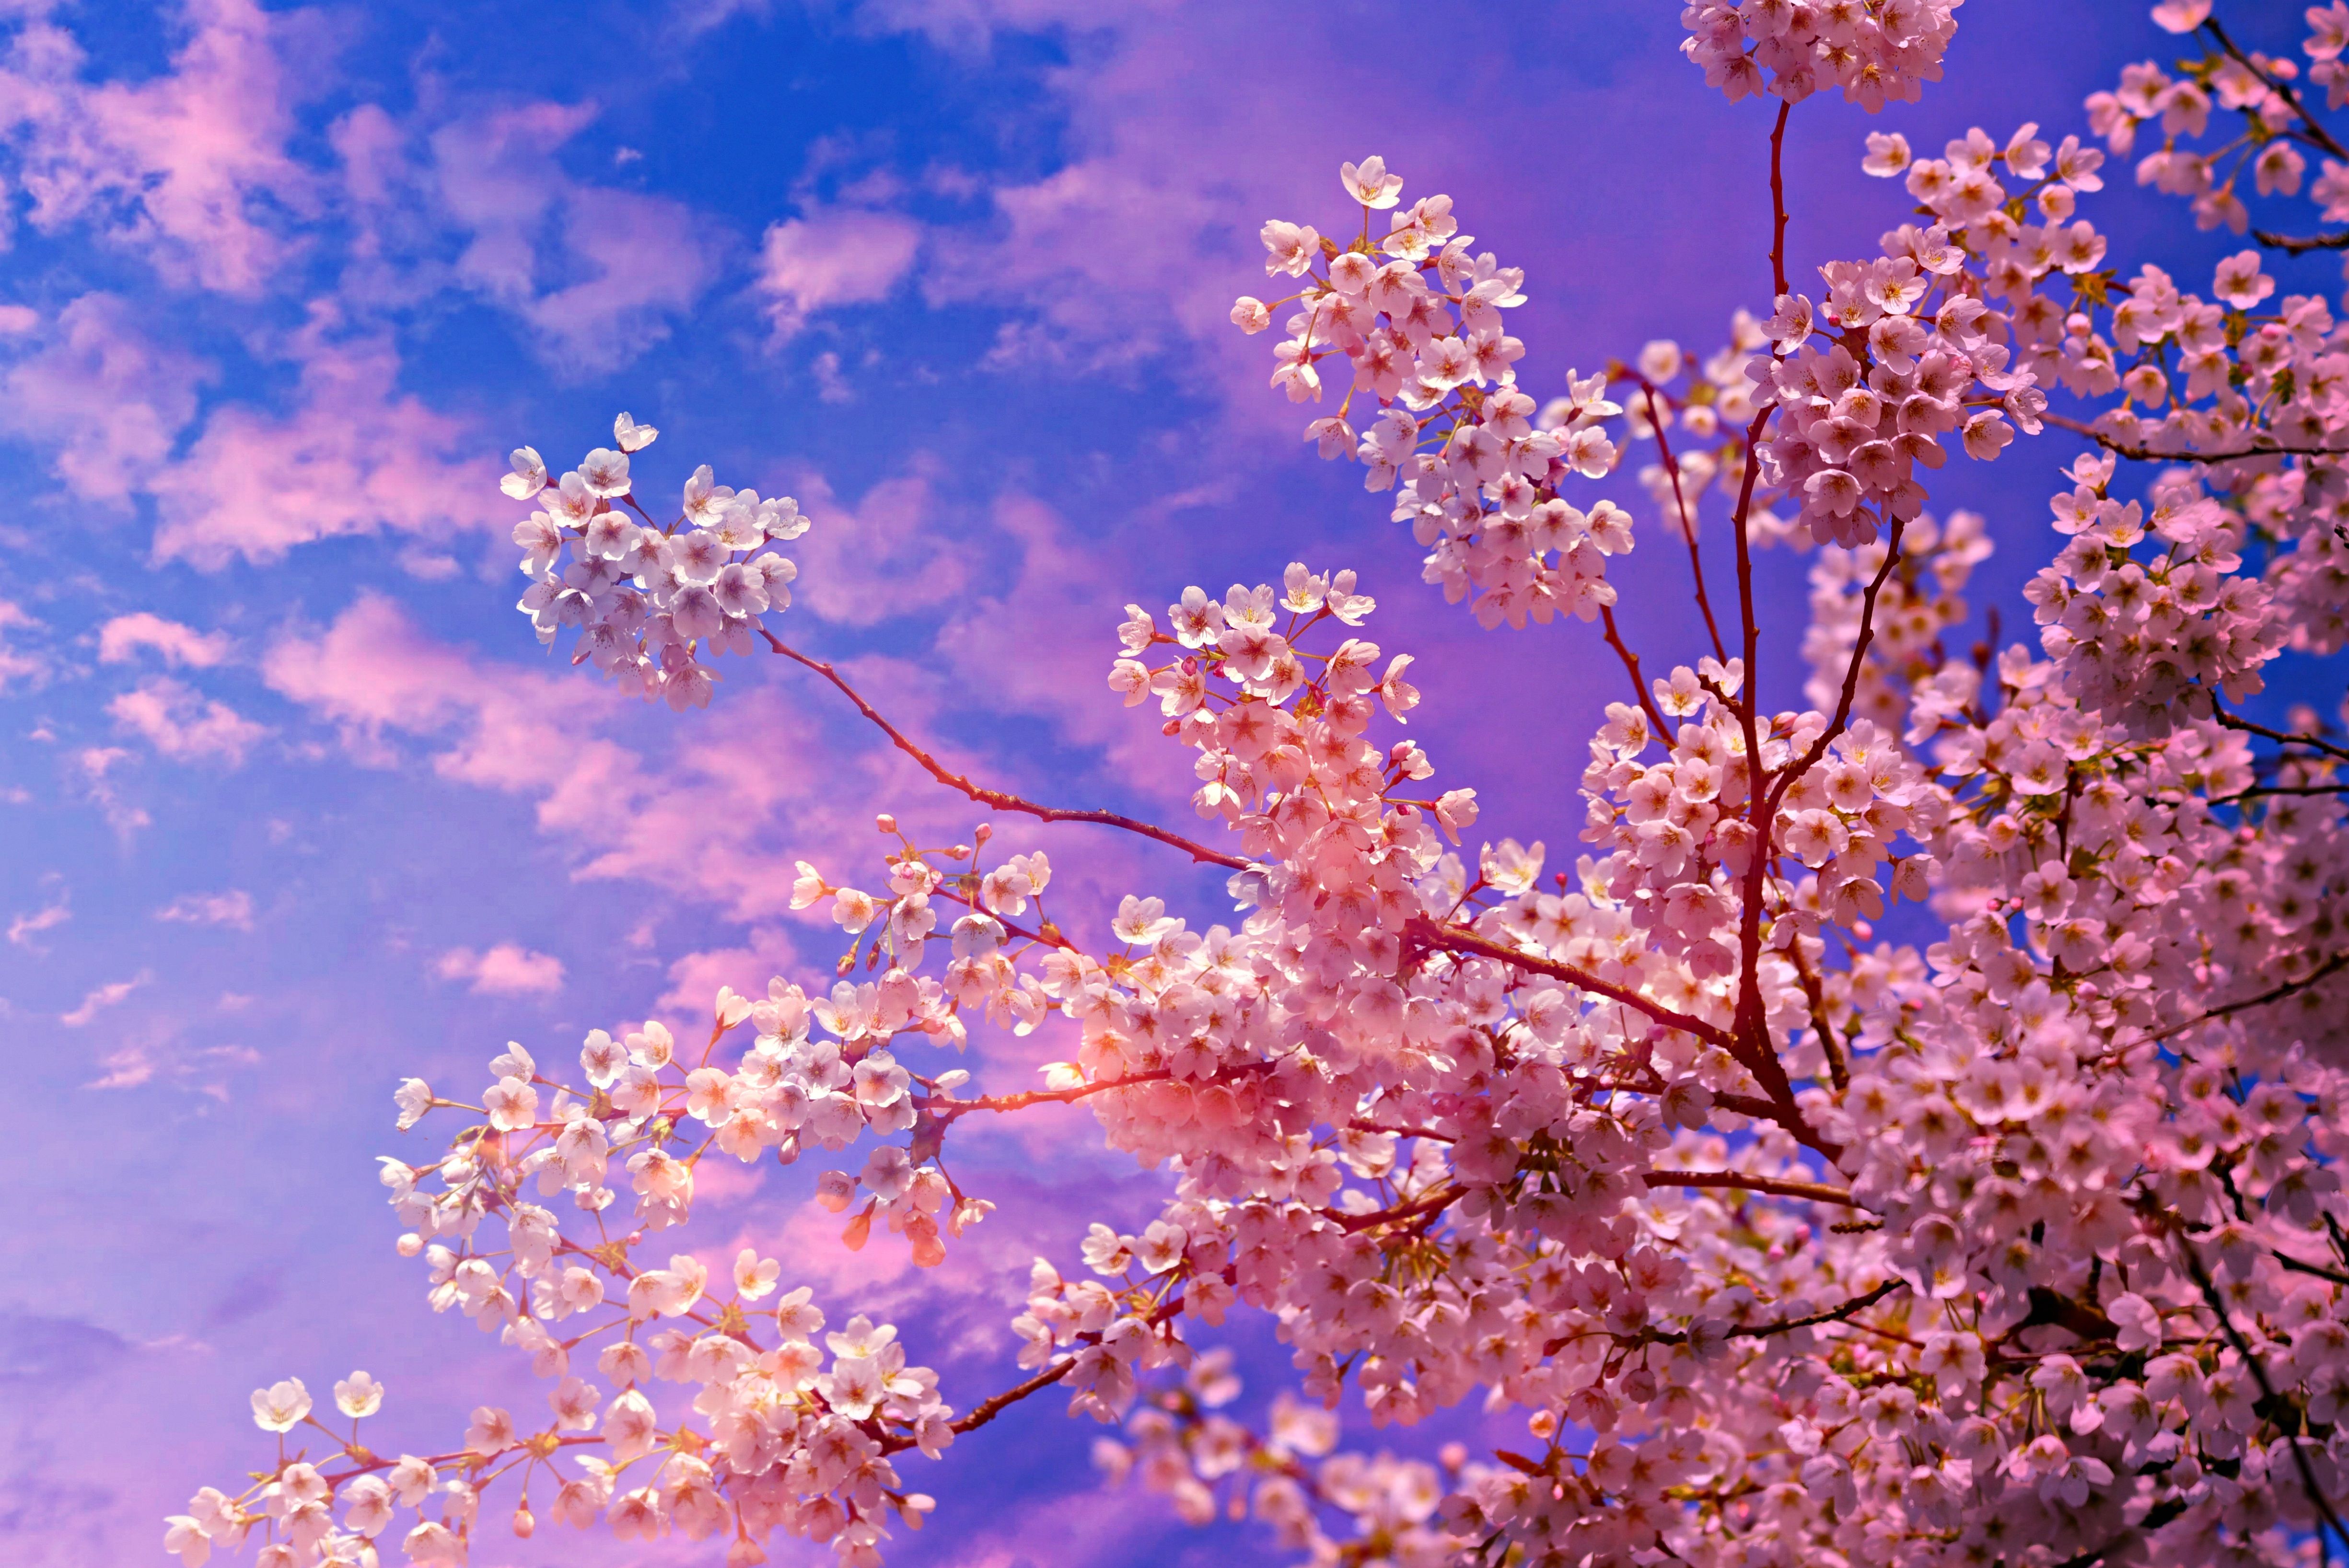 Cherry Blossom Tree 4k 5k 1440P Resolution HD 4k Wallpaper, Image, Background, Photo and Picture